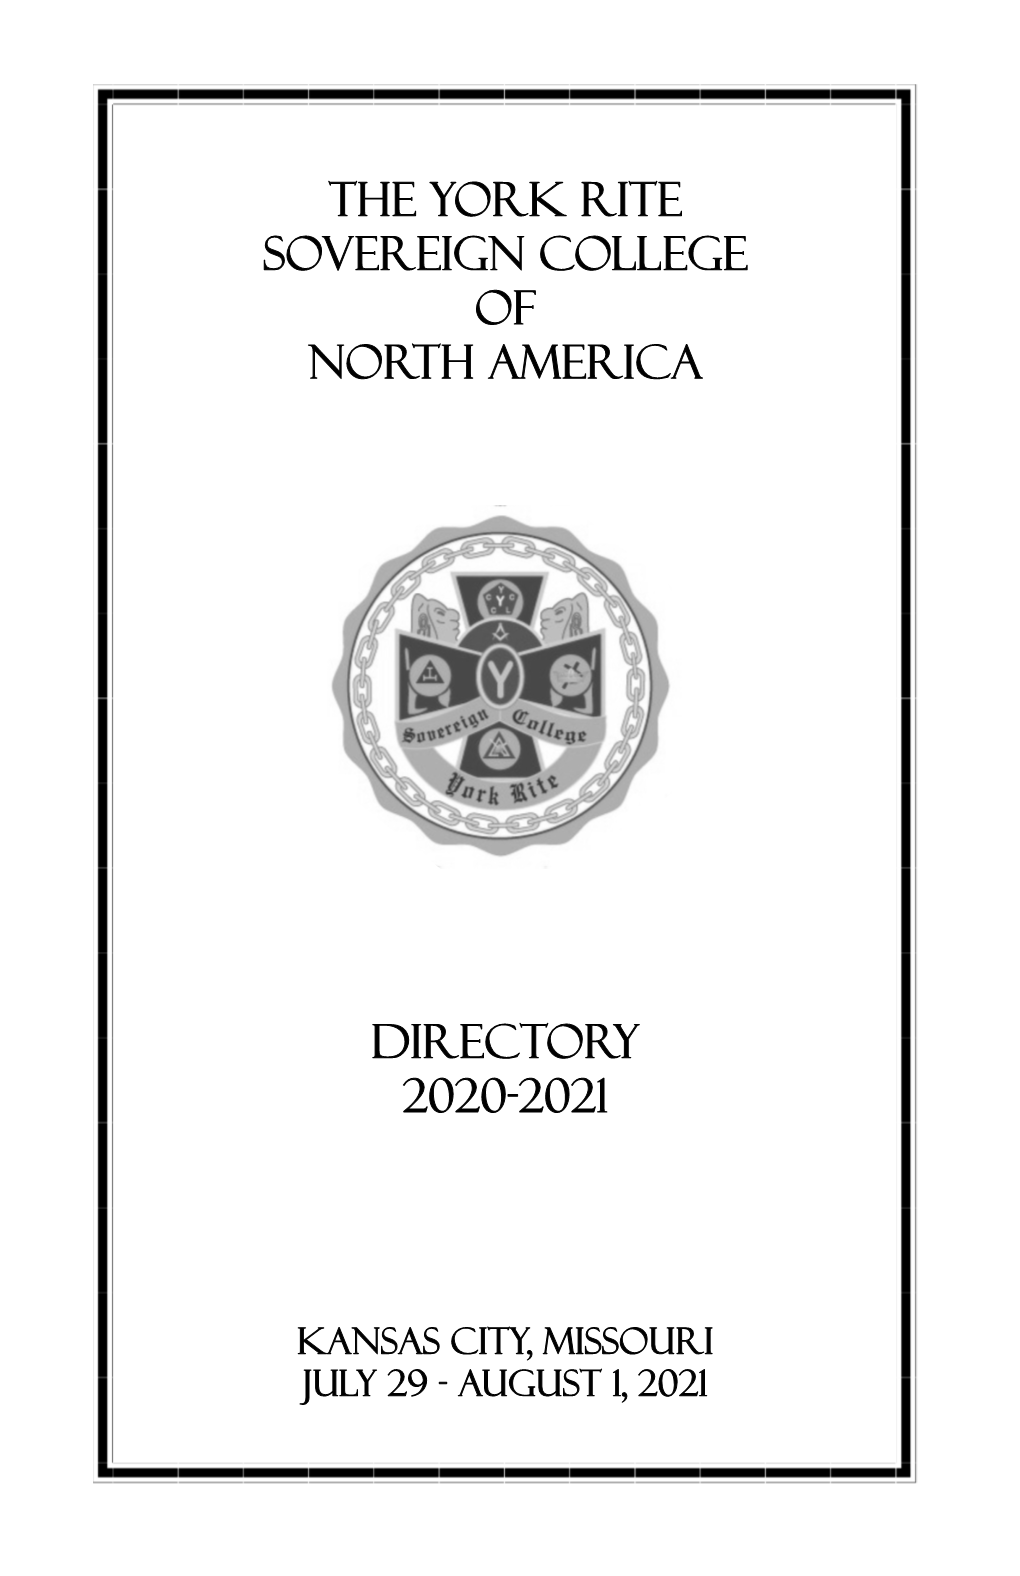 The York Rite Sovereign College of North America Directory 2020-2021